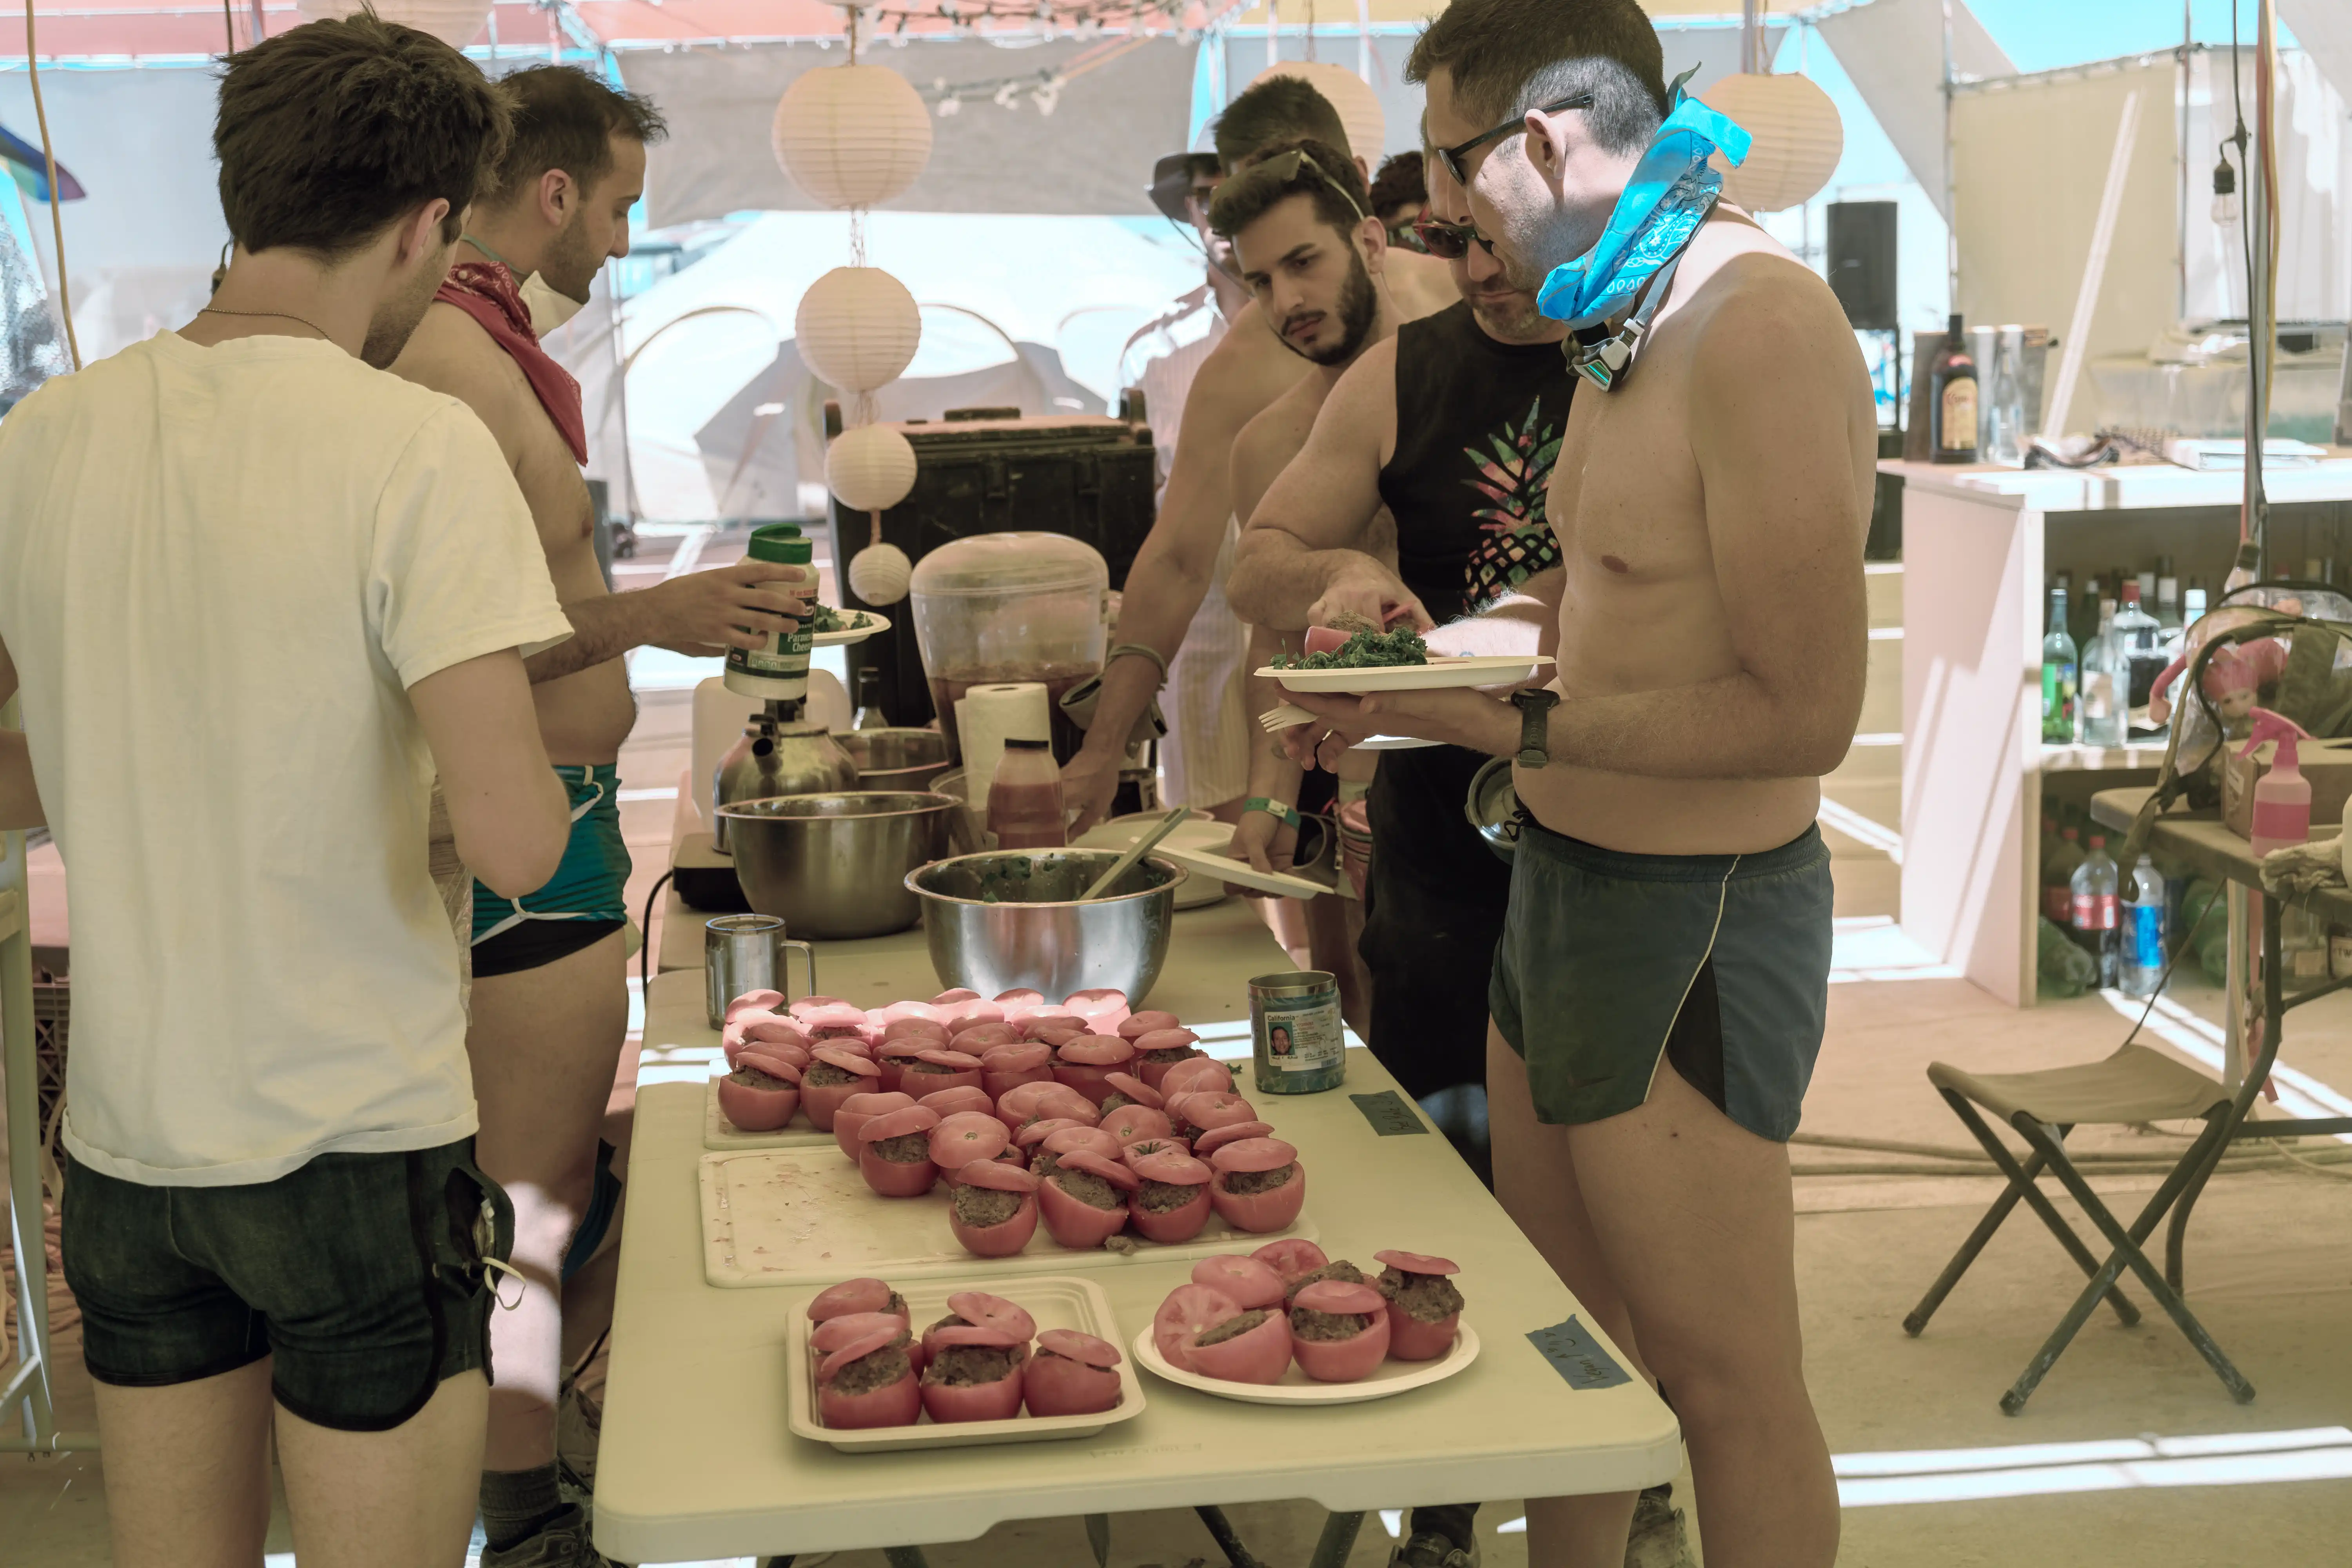 The line to get food inside the main shade at the Future Turtles. A half dozen attractive men, with and without shirts, are filling up their plates from a buffet set up on folding tables. In the foreground, tomatoes stuffed with ground beef. There are several bowls of salads and a clear urn of iced coffee.